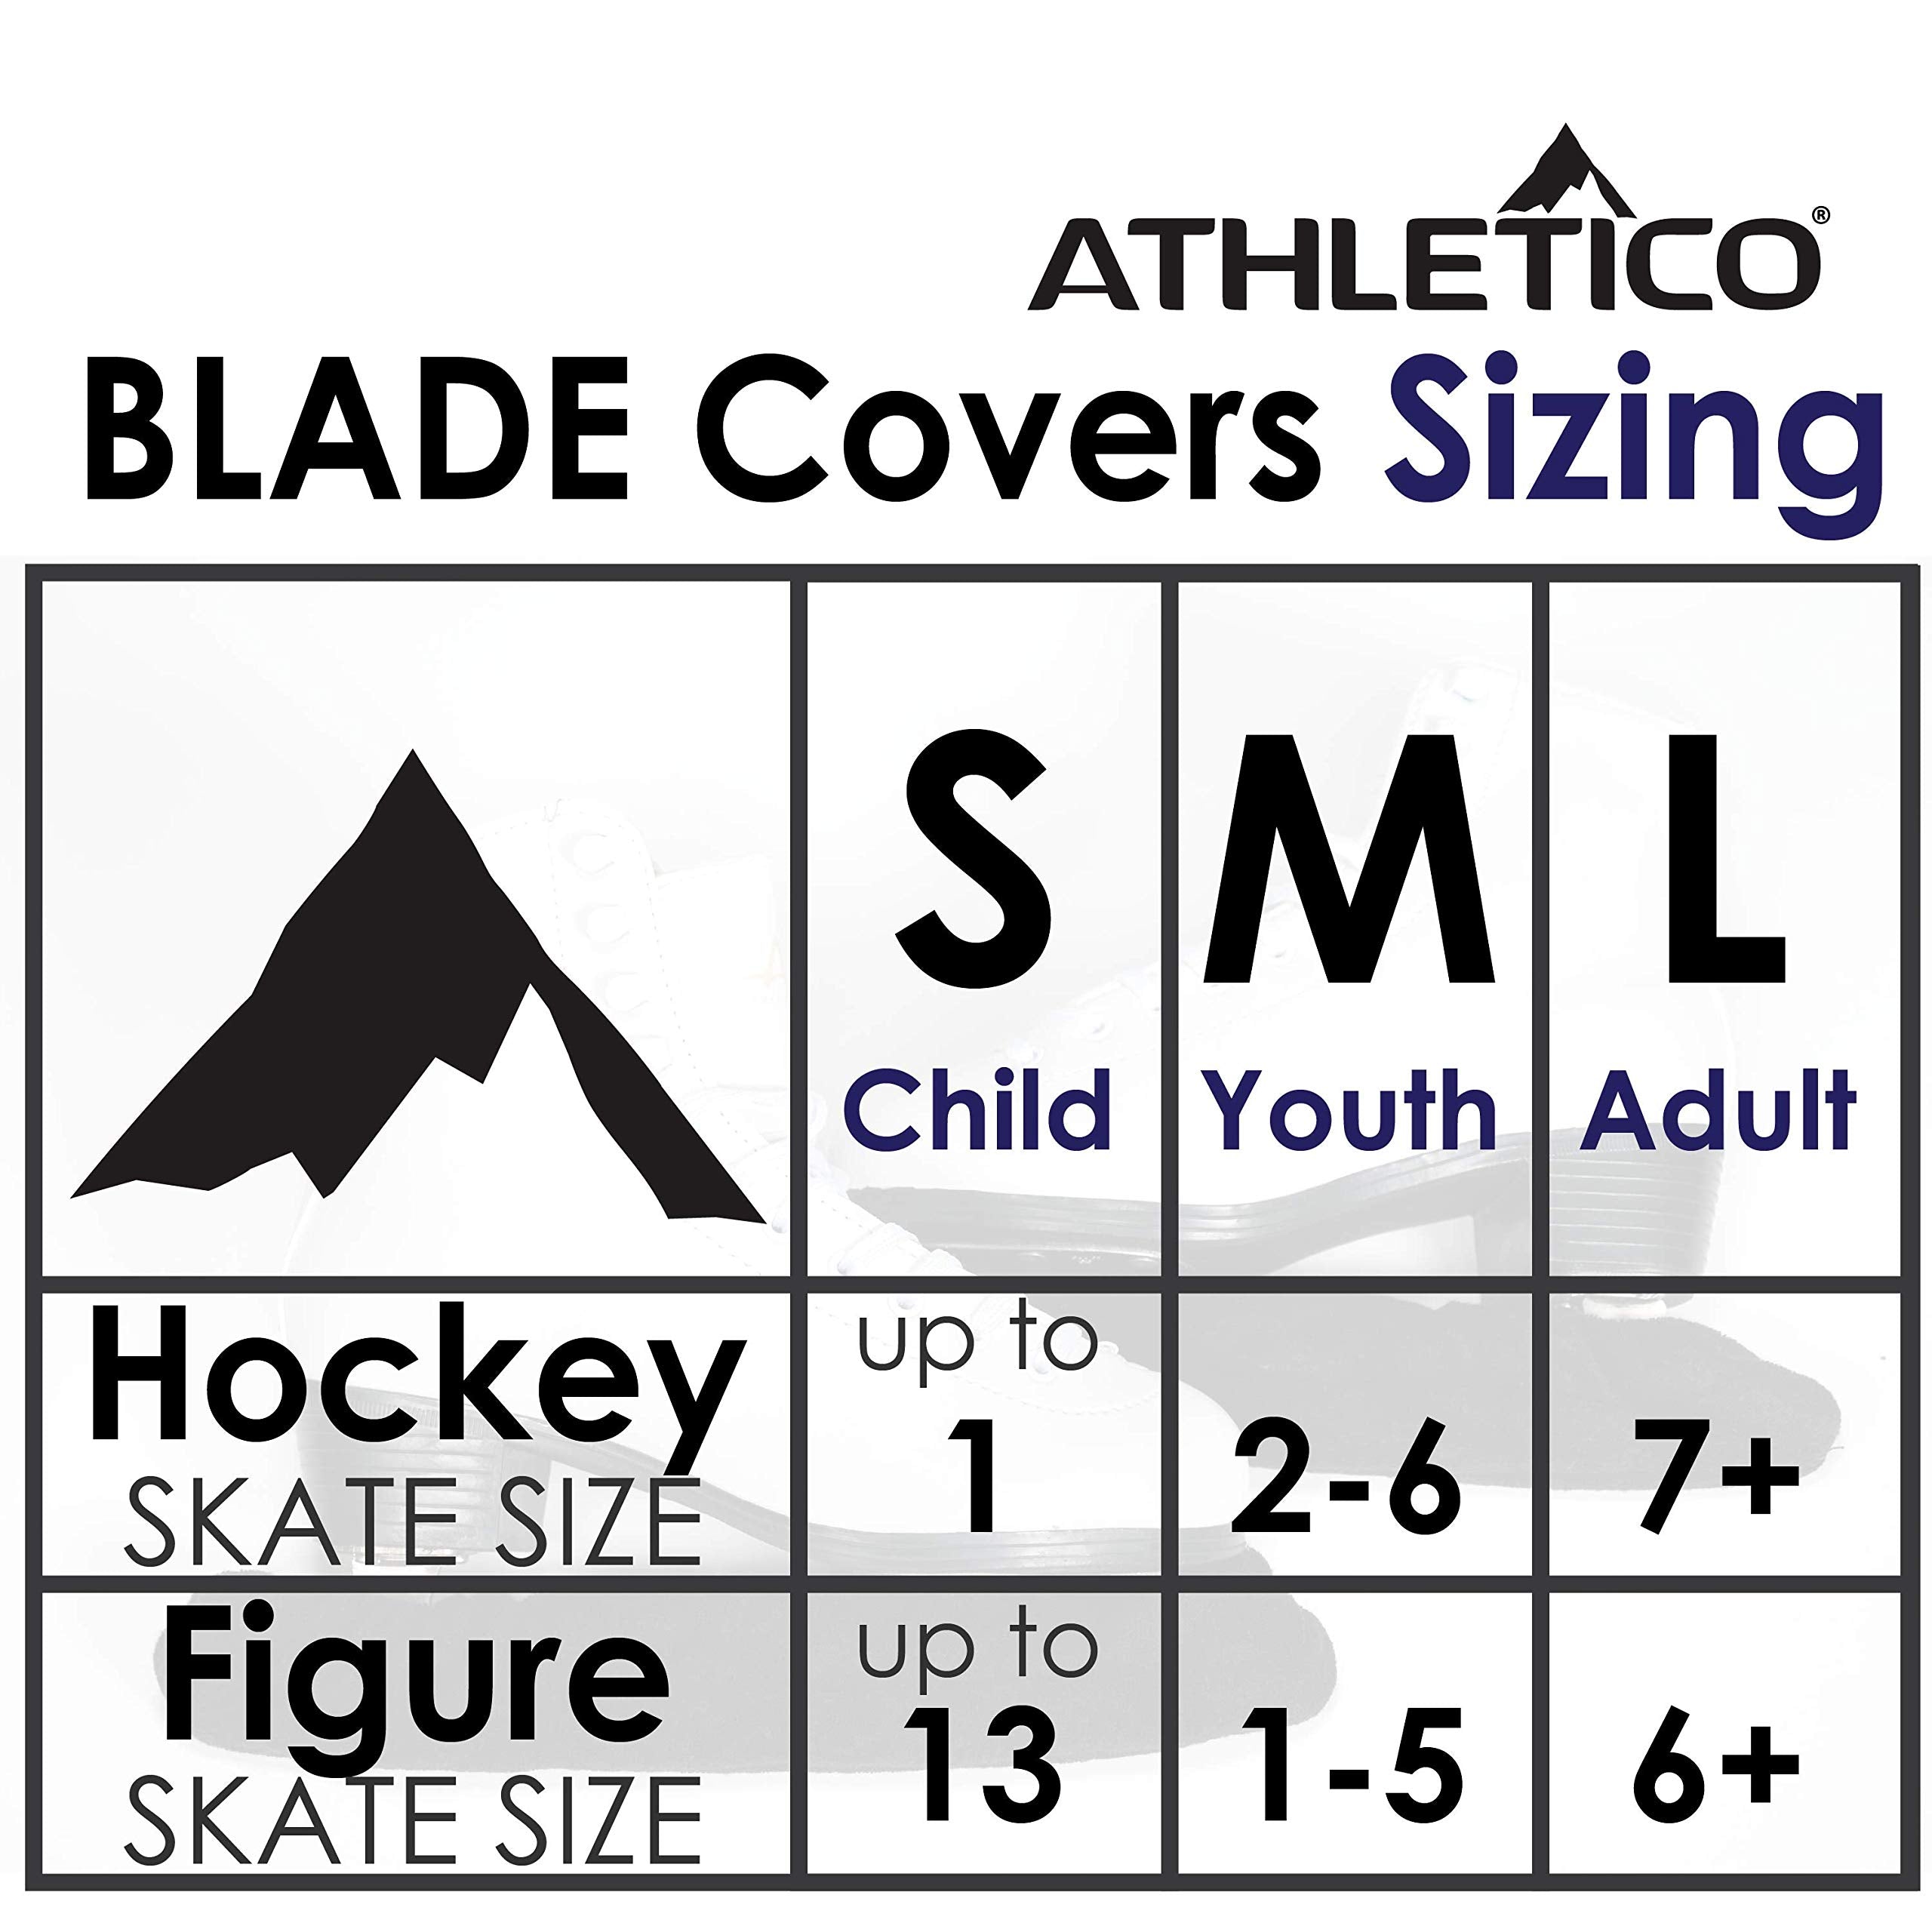 Athletico Ice Skate Blade Covers - Guards for Hockey Skates, Figure Skates, and Ice Skates - Skating Soakers Cover Blades from Youth to Adult Size - Men, Women, & Kids  - Like New